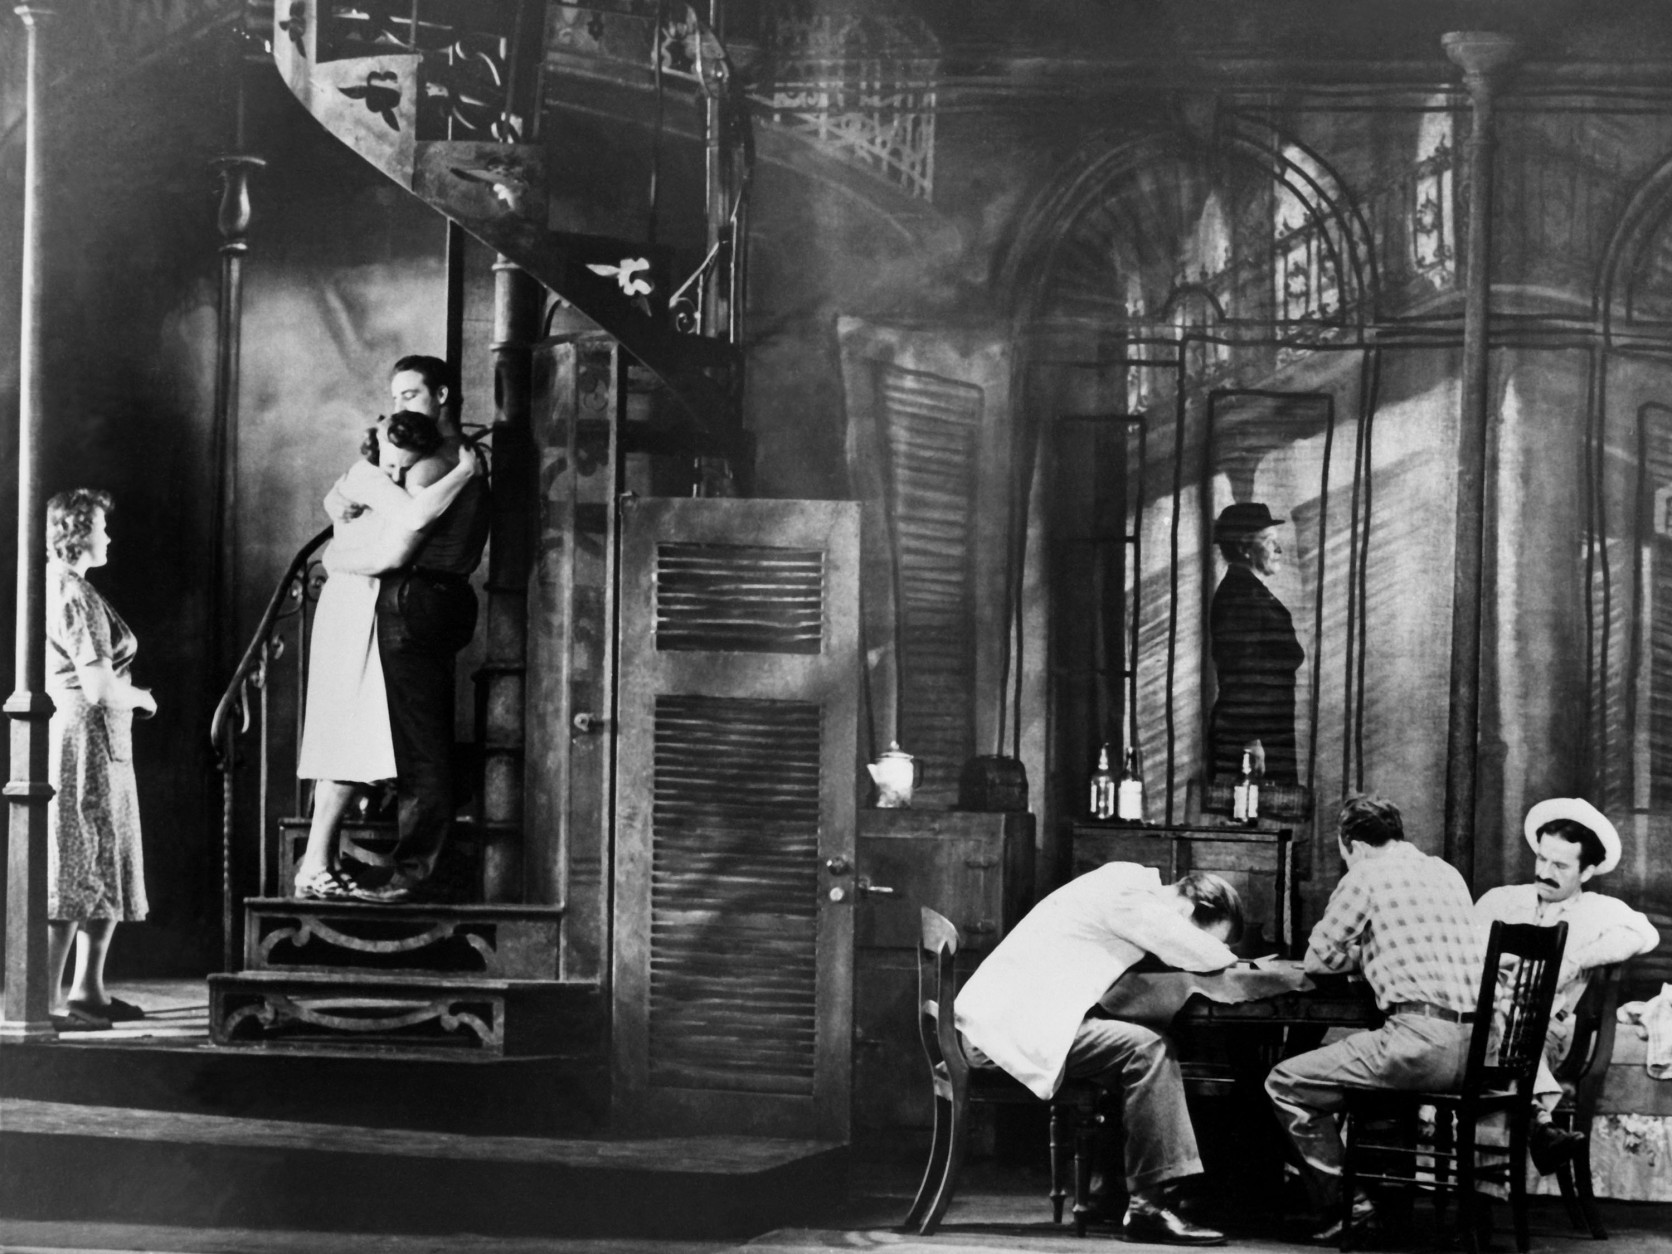 The final scene of the original Broadway production of Tennessee Williams' play " A Streetcar Named Desire," is shown on December 17, 1947, in New York City. The cast includes Marlon Brando as Stanley Kowalski, Kim Hunter as Stella, and Jessica Tandy as Blanche. (AP Photo)